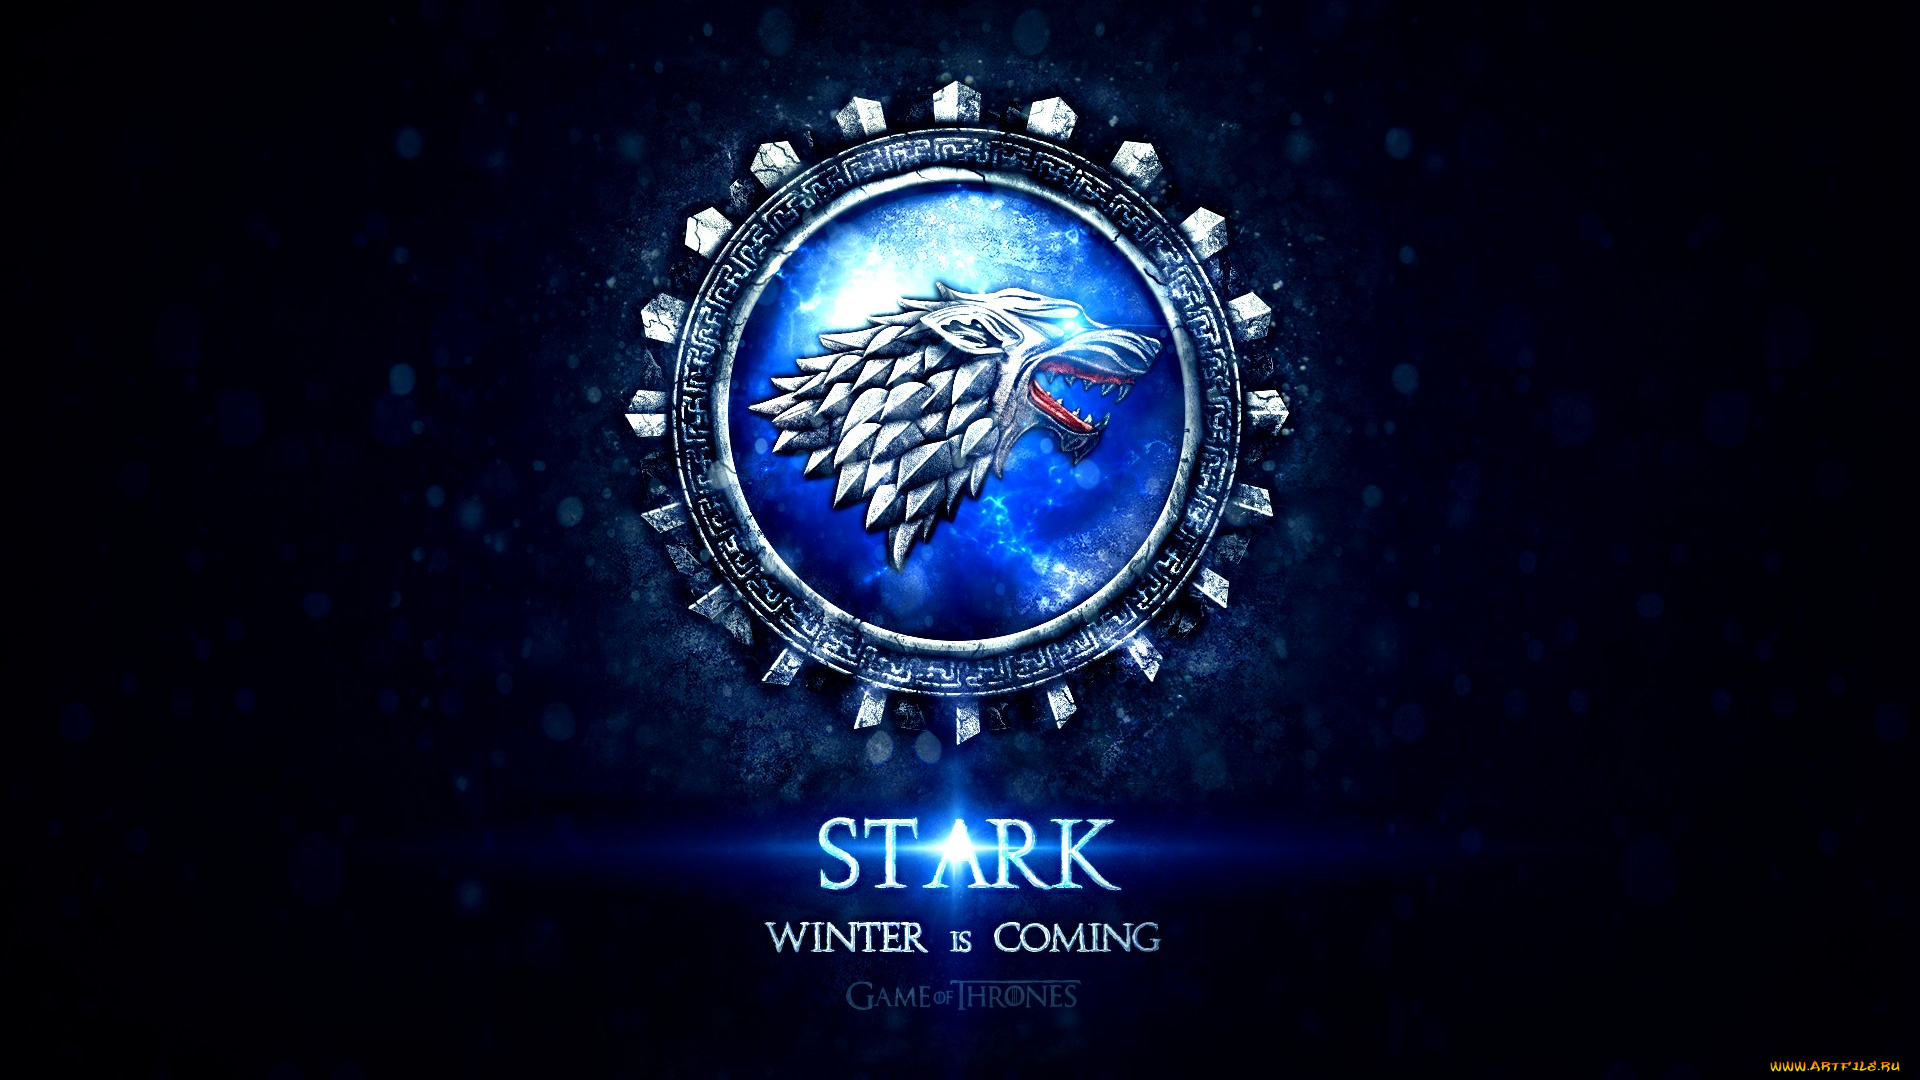 кино, фильмы, game, of, thrones, , сериал, thrones, and, ice, of, a, song, старки, эмблема, герб, fire, game